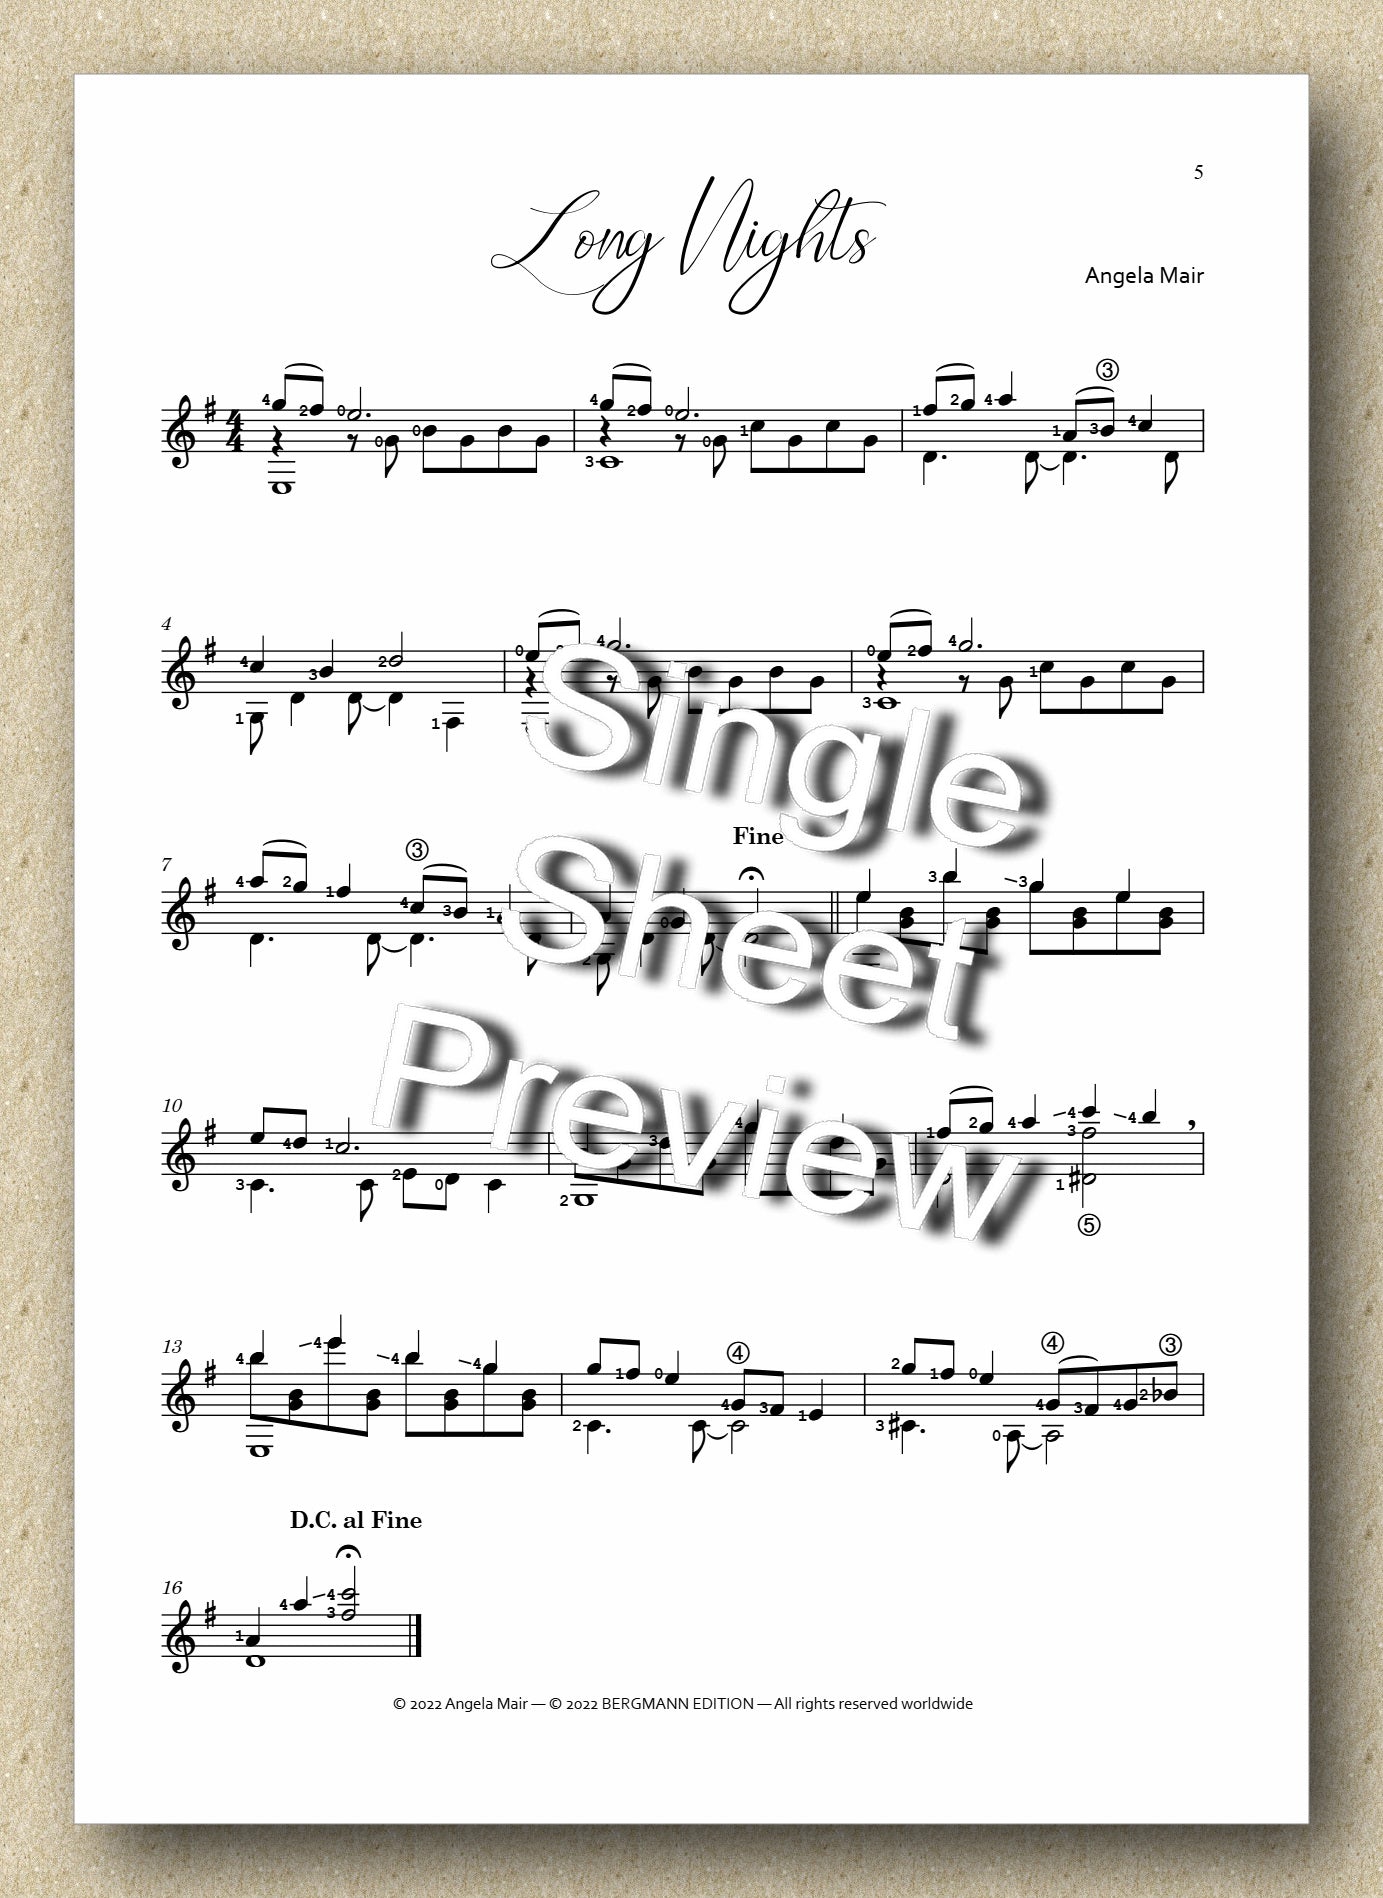 One by One - vol. 4, by Angela Mair - preview of the music score 1